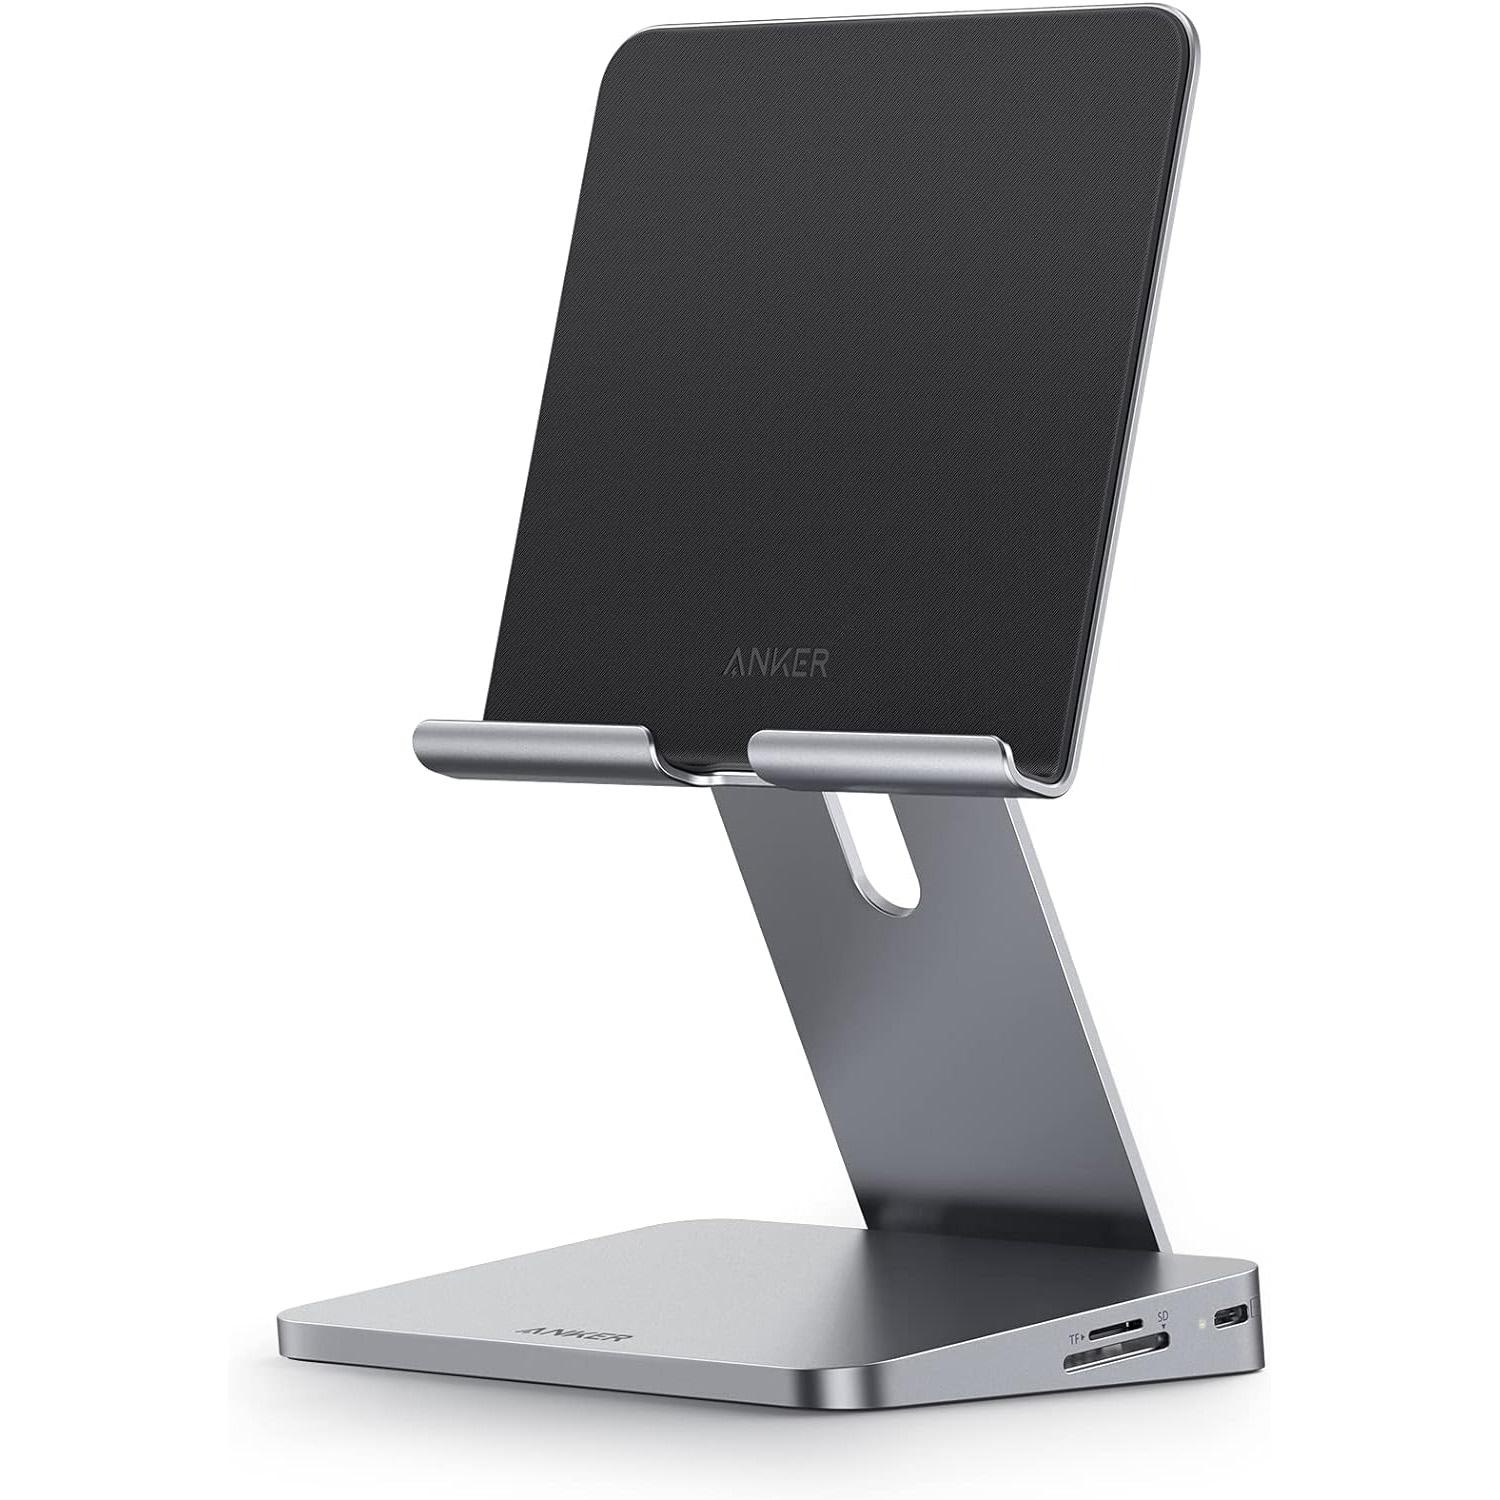 iPad Anker 551 8-in-1 USB-C Hub with Foldable Tablet Stand for $63.99 Shipped